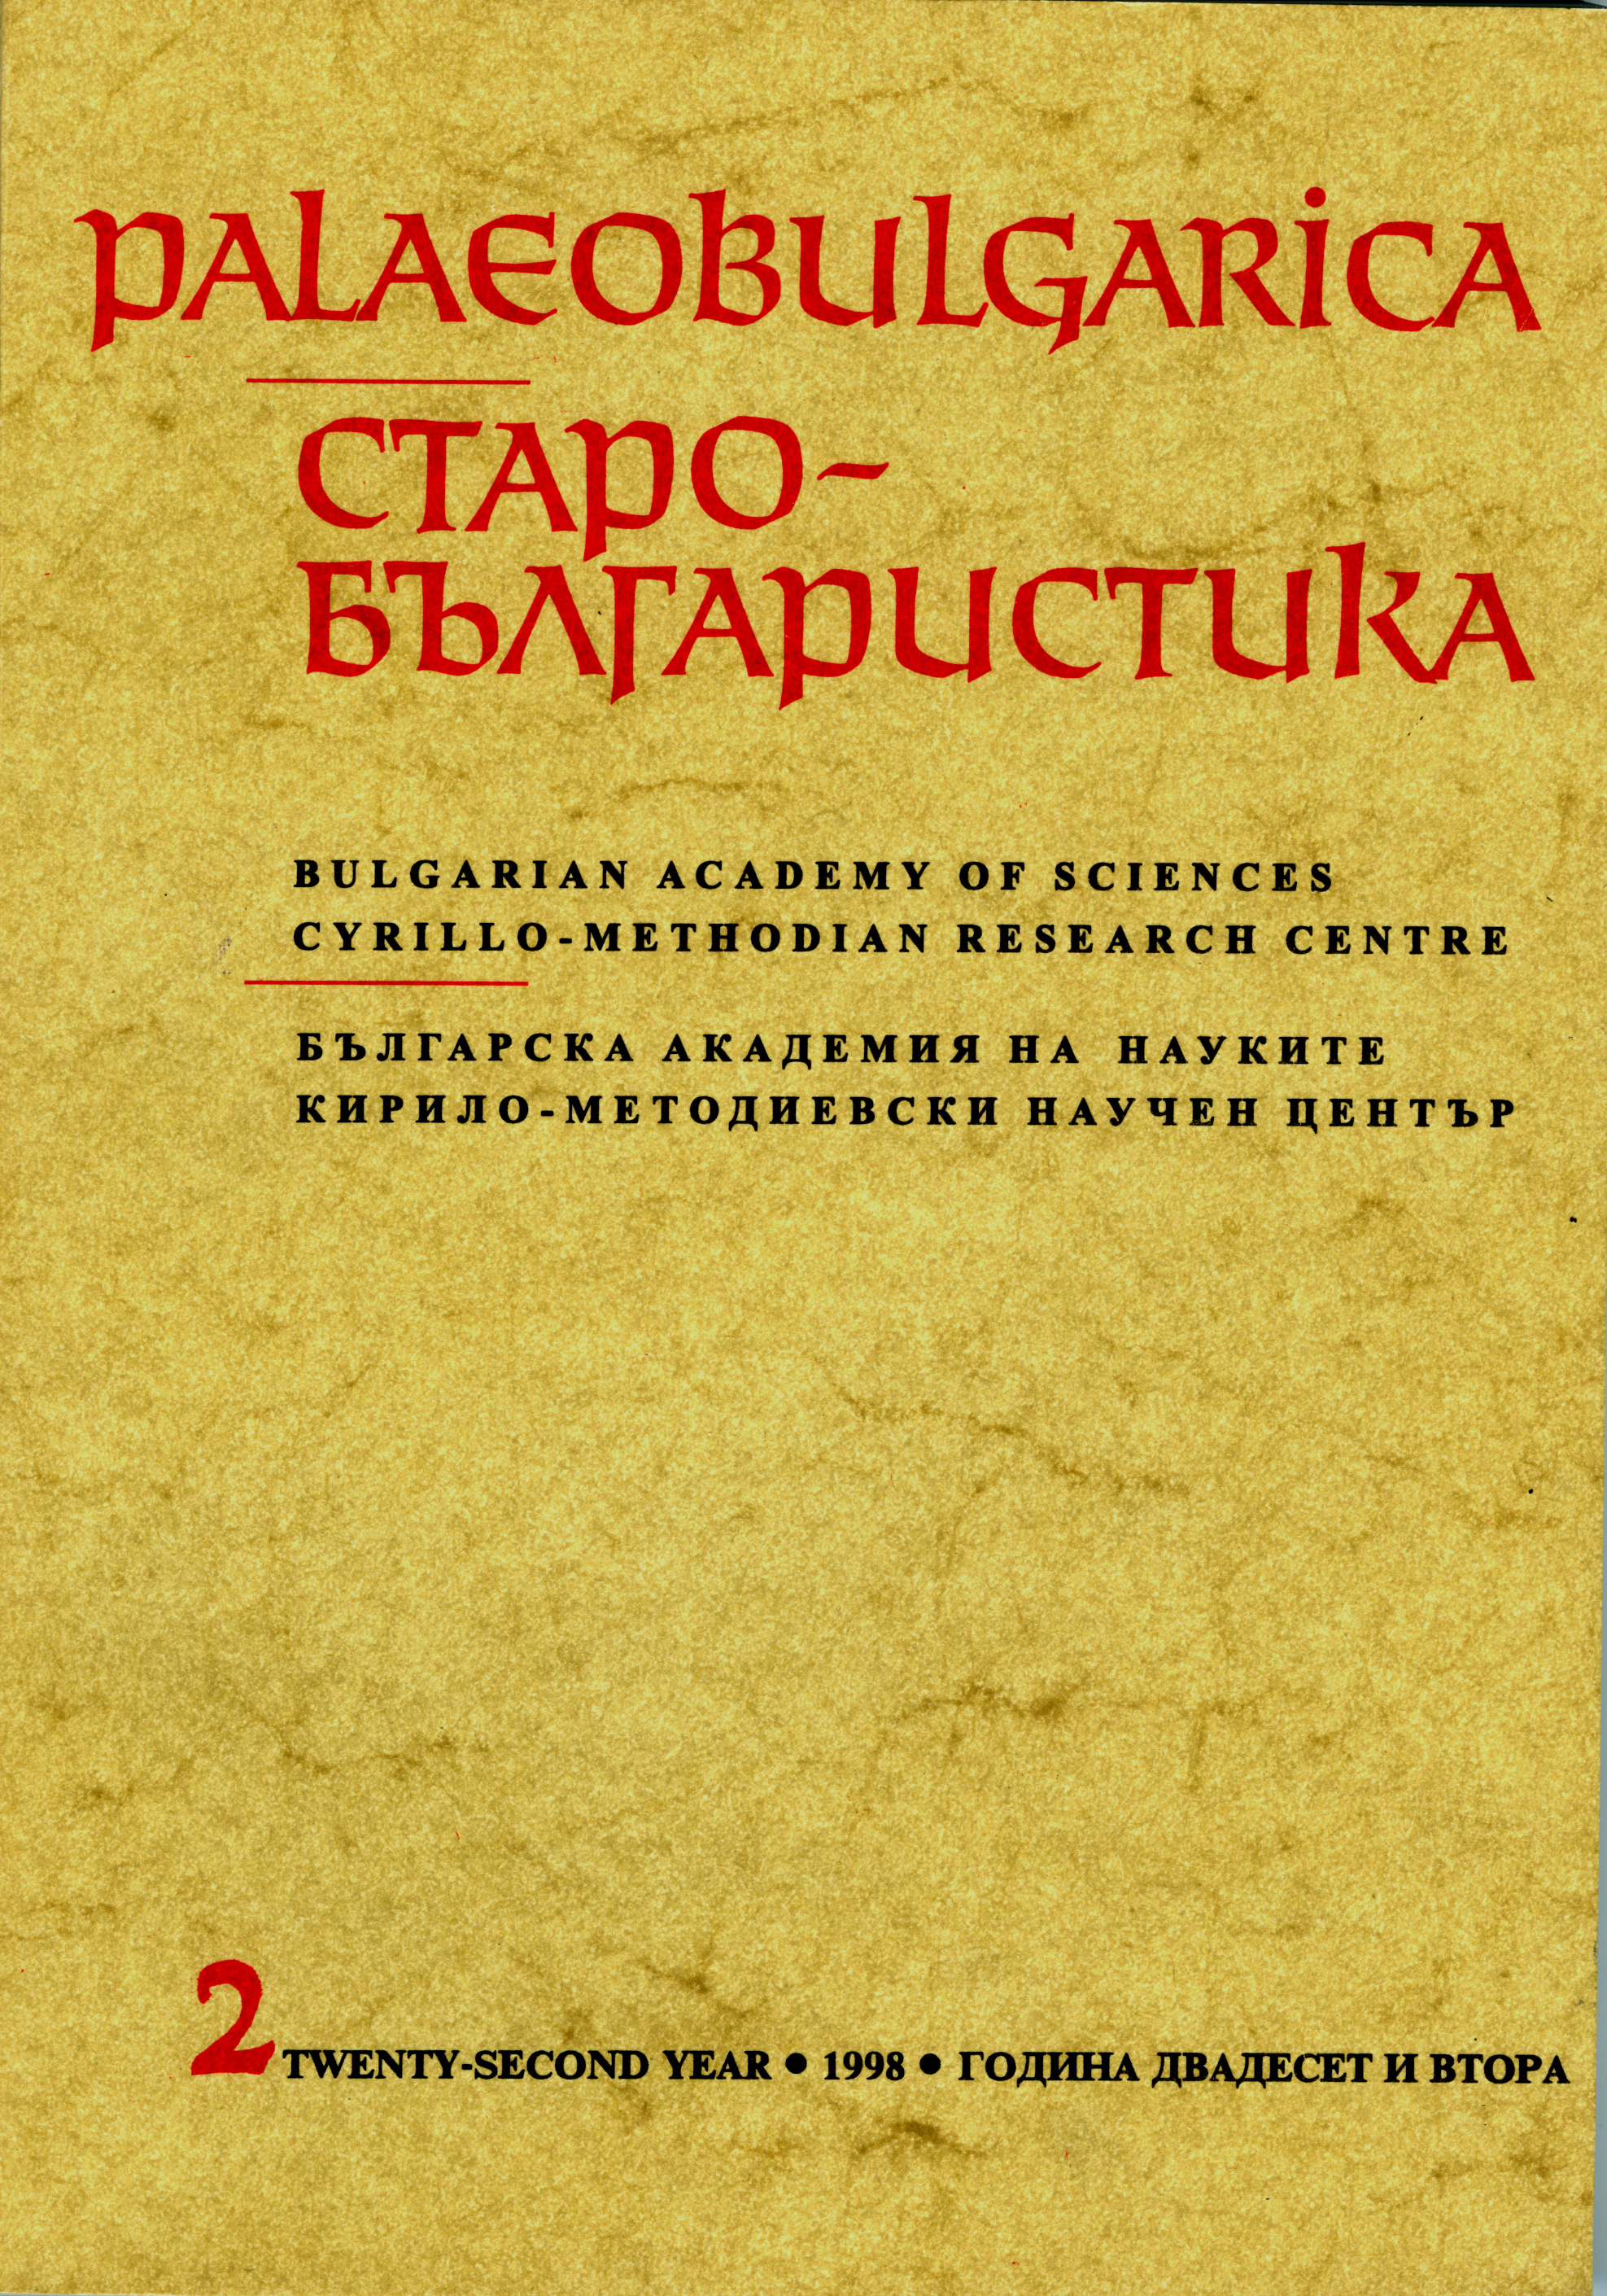 A Computer Collation of Medieval Slavic Menologies